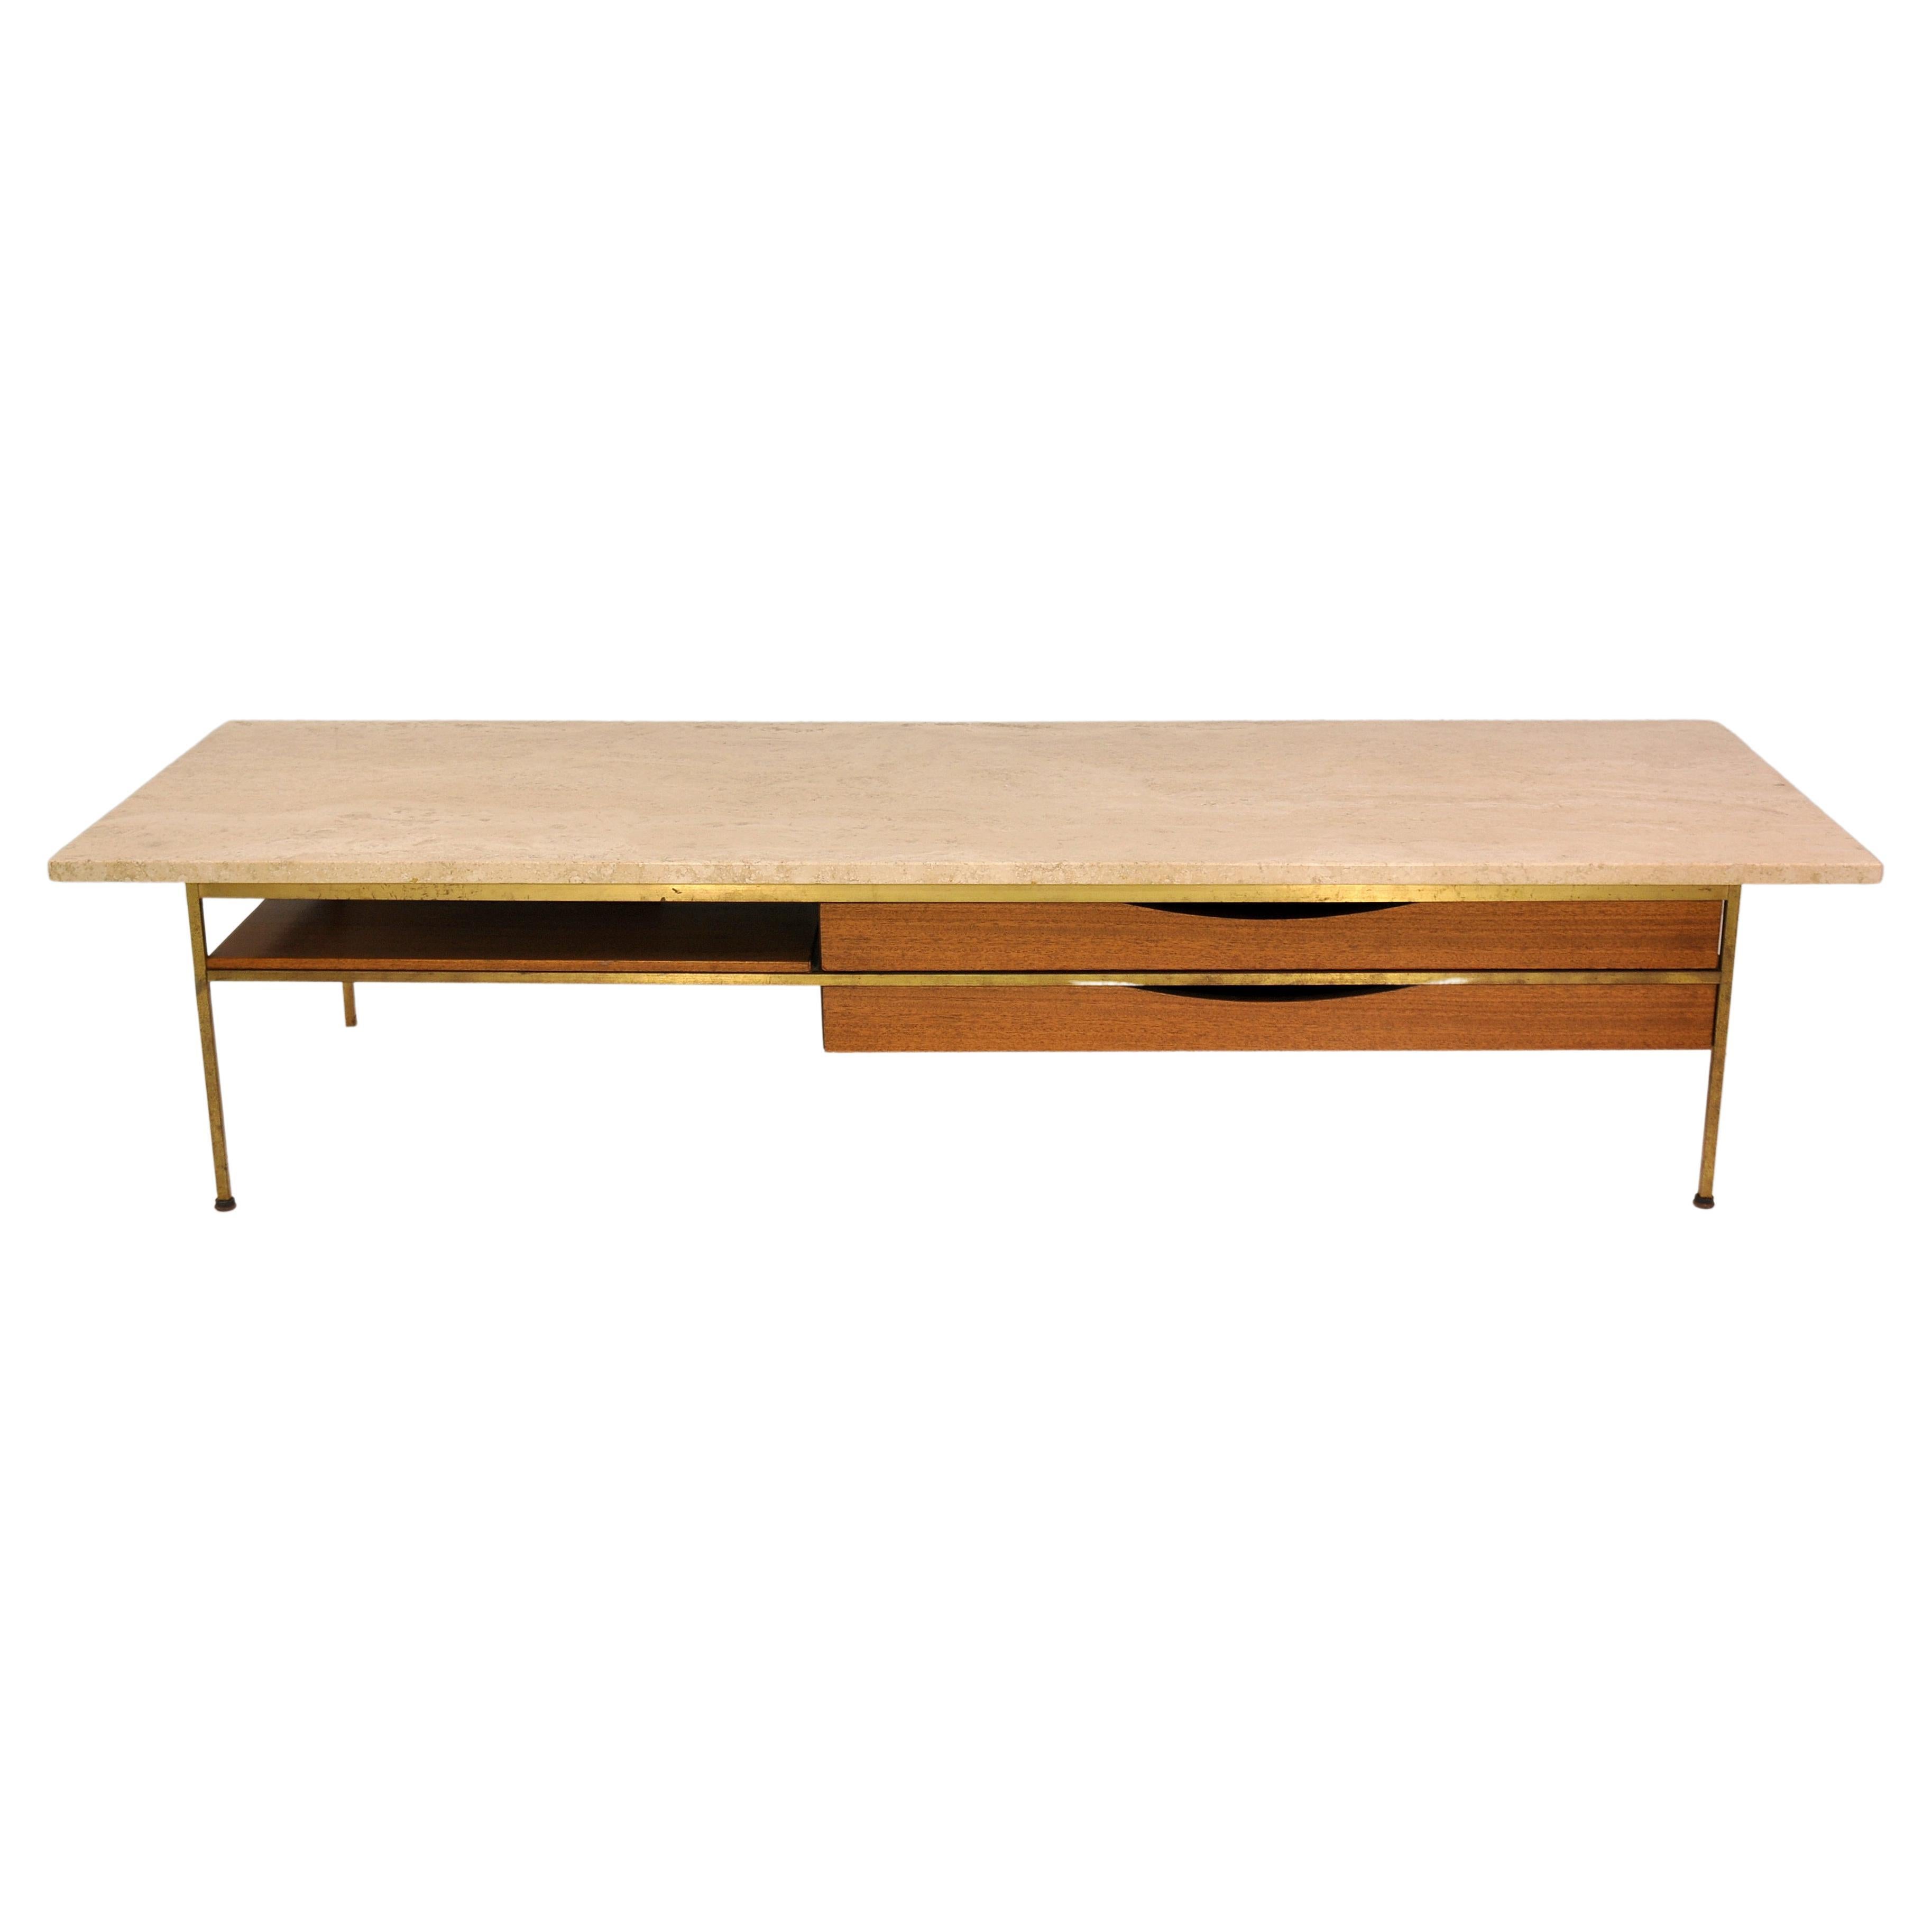 All original Paul McCobb mahogany and brass cocktail table model 8706 with travertine marble top from the Irwin Collection by Calvin Furniture, which is part of the work the designer created for Directional. The mid-century modern table features: